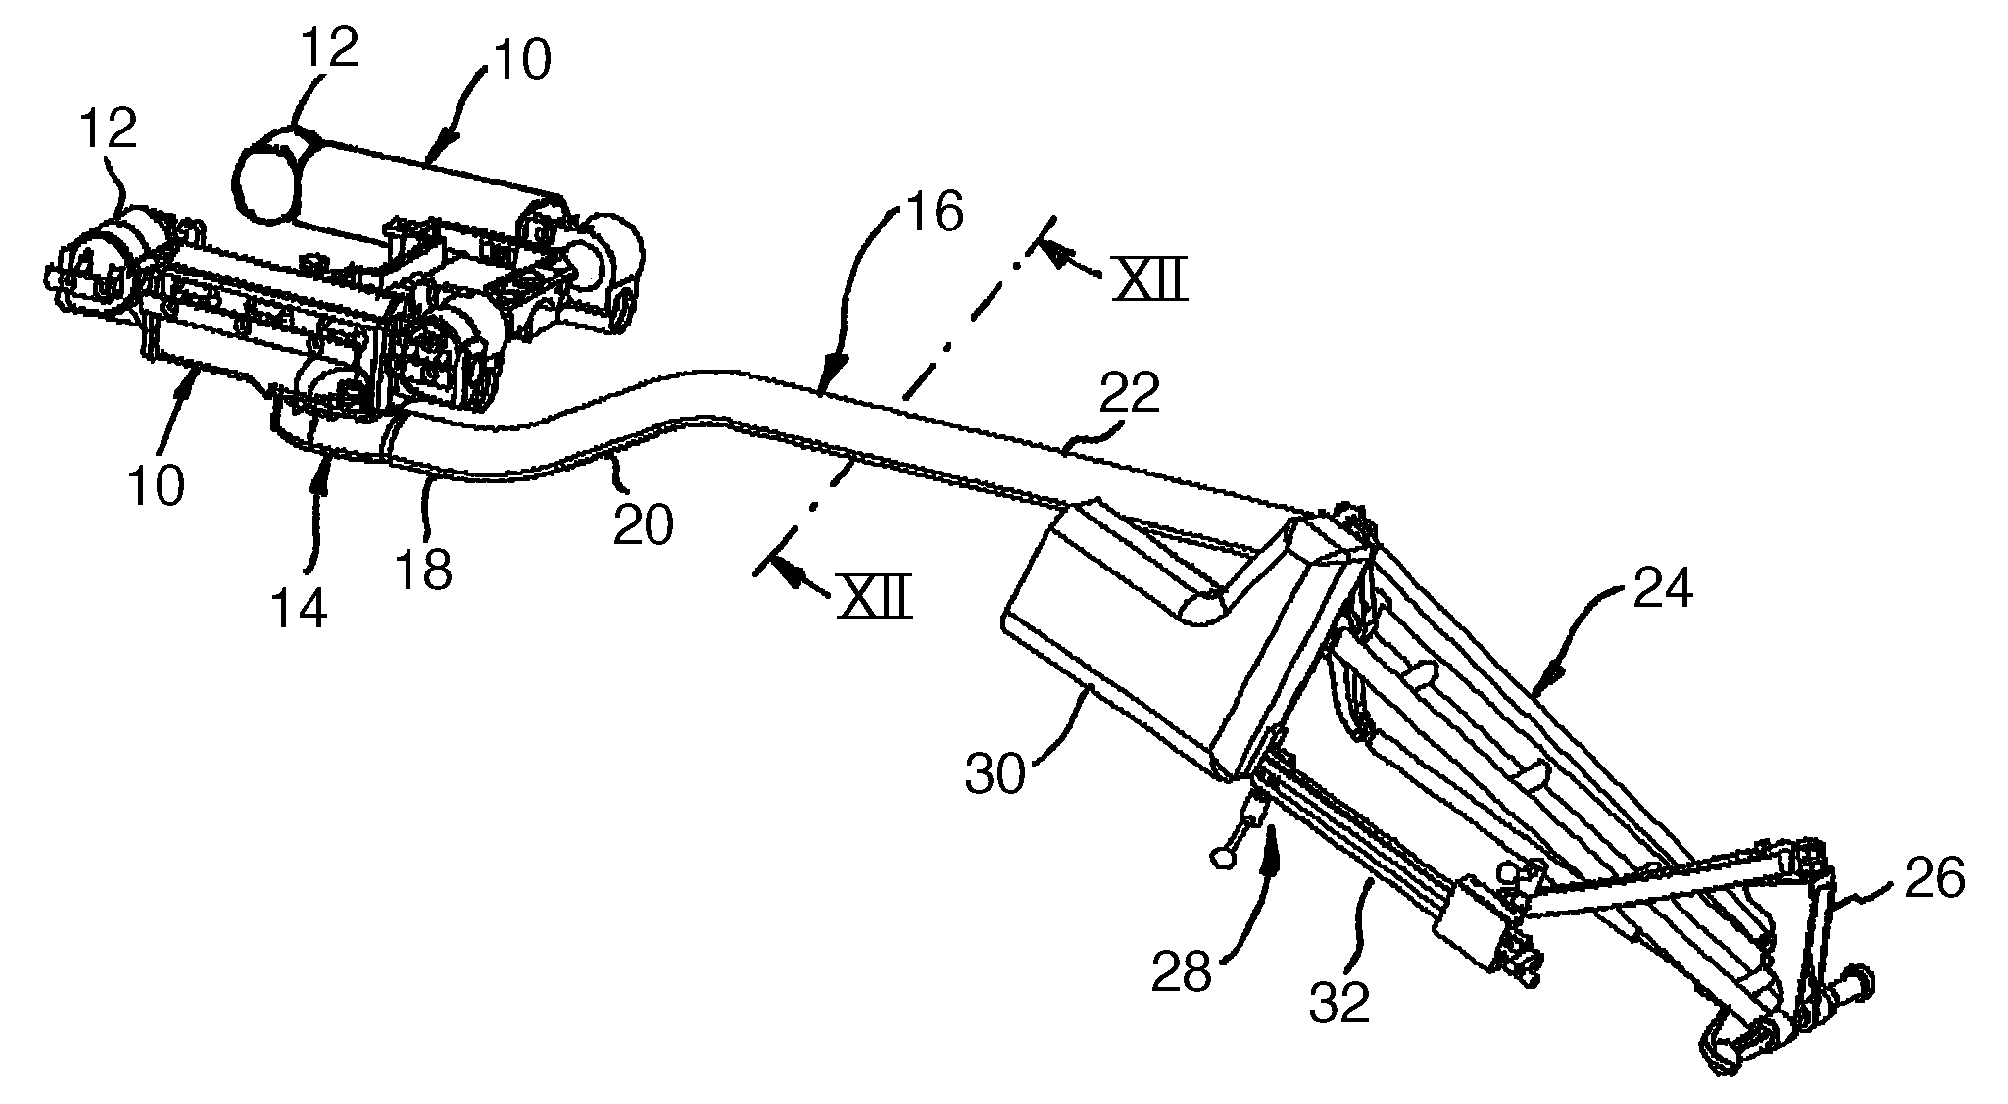 Extension device